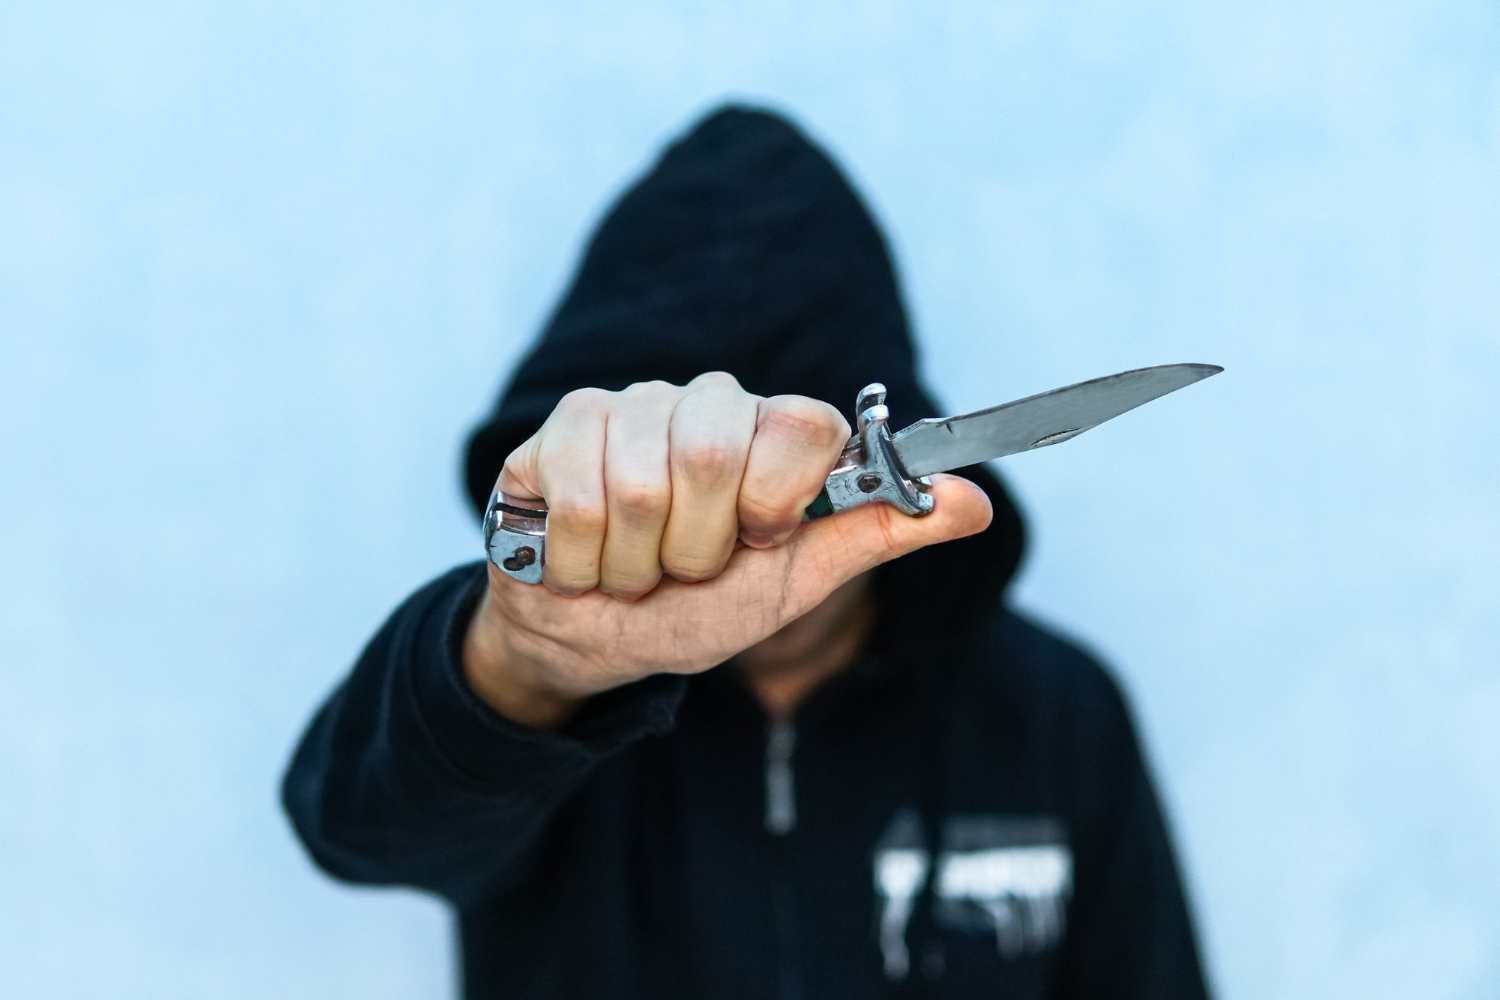 young man in hoodie holding a flick knife making threats